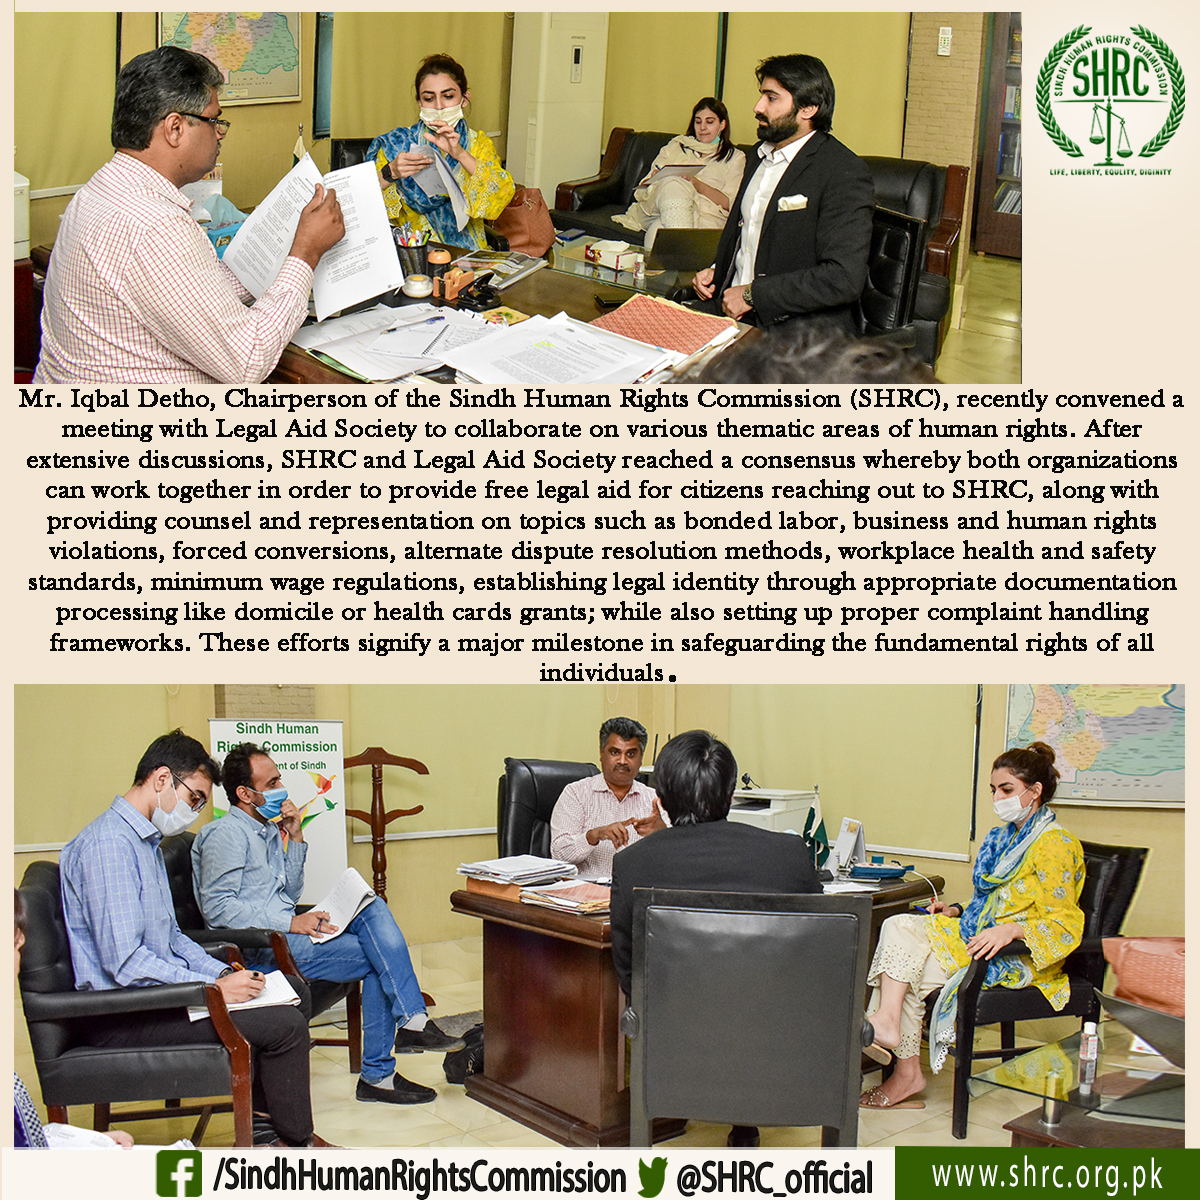 Mr. Iqbal Detho, Chairperson of the (SHRC), recently convened a meeting with Legal Aid Society to collaborate on various thematic areas of human rights.